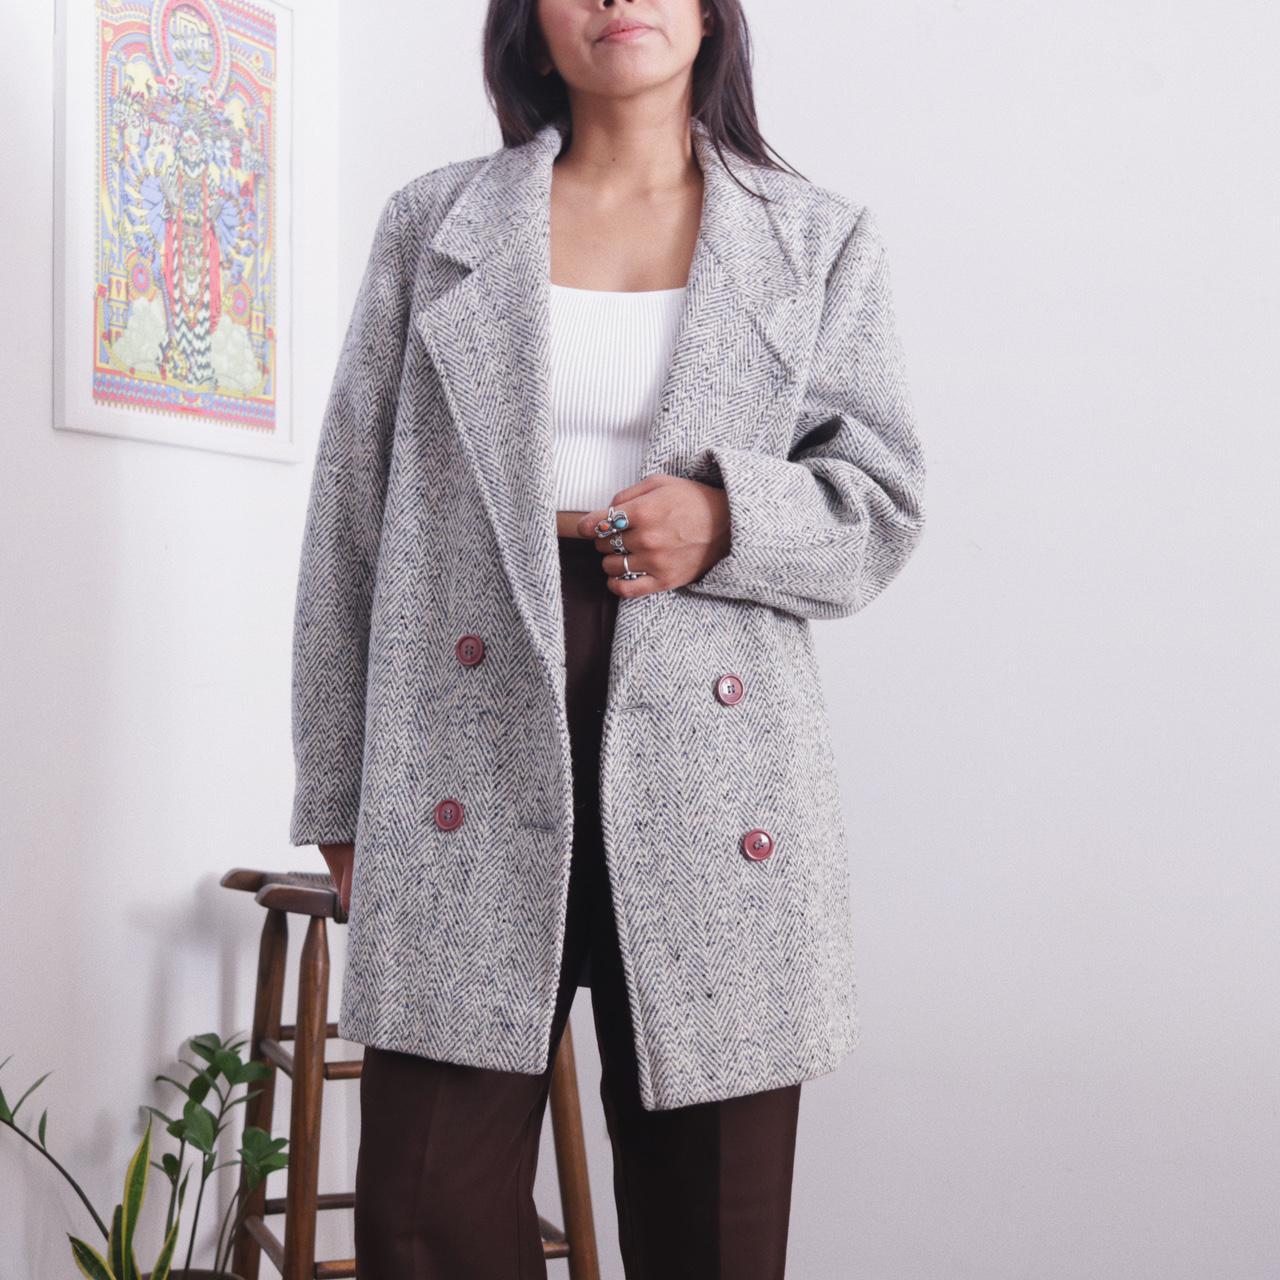 American Vintage Women's Grey and Blue Coat (2)